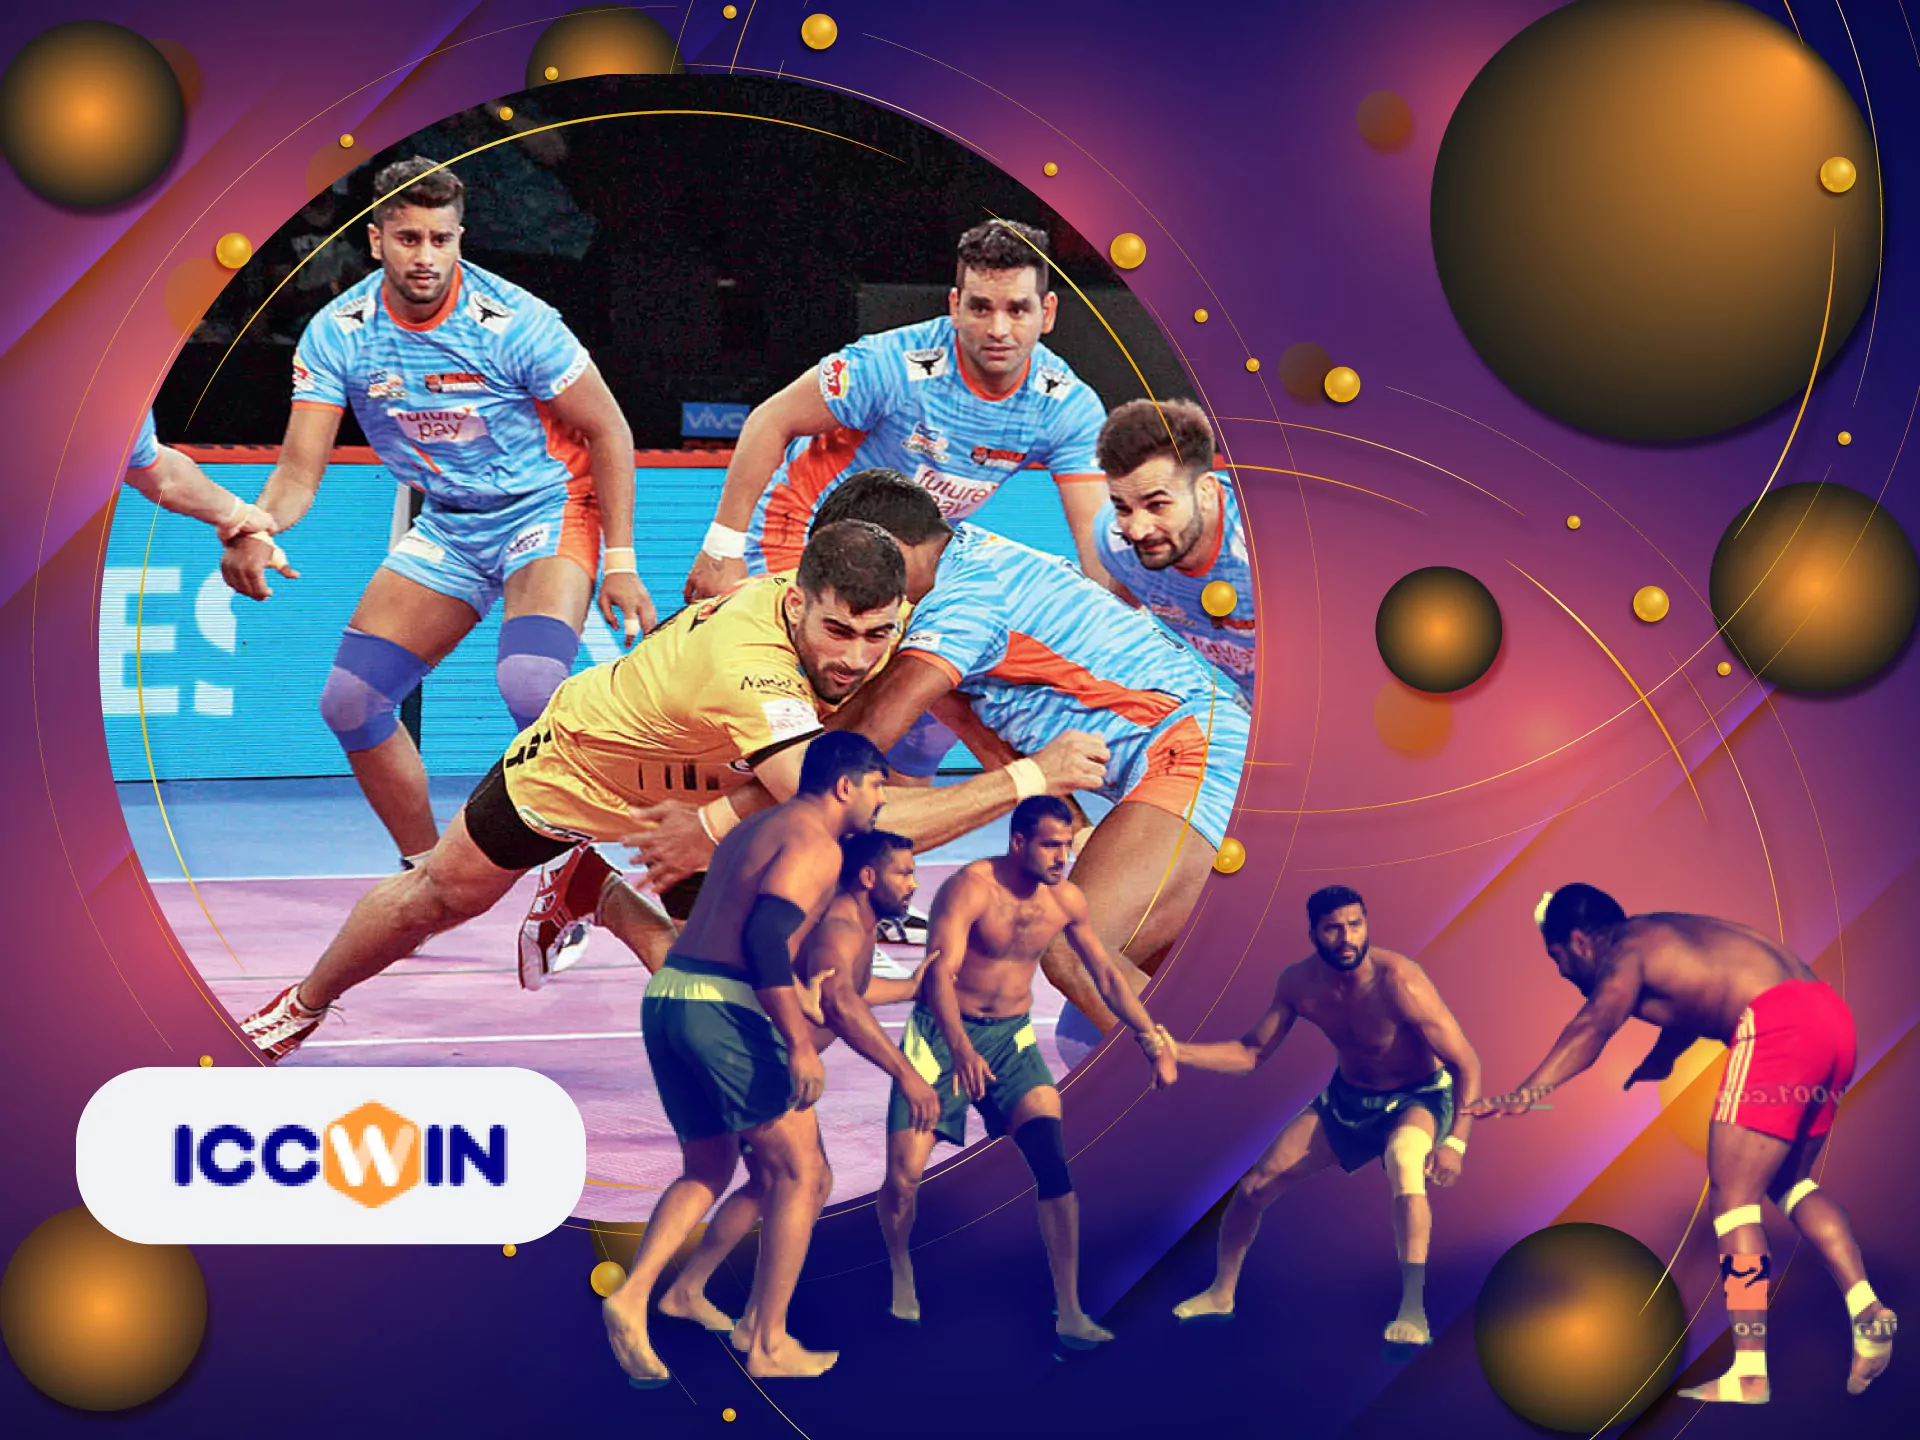 You can also bet on kabaddi games on the ICCWIN website.